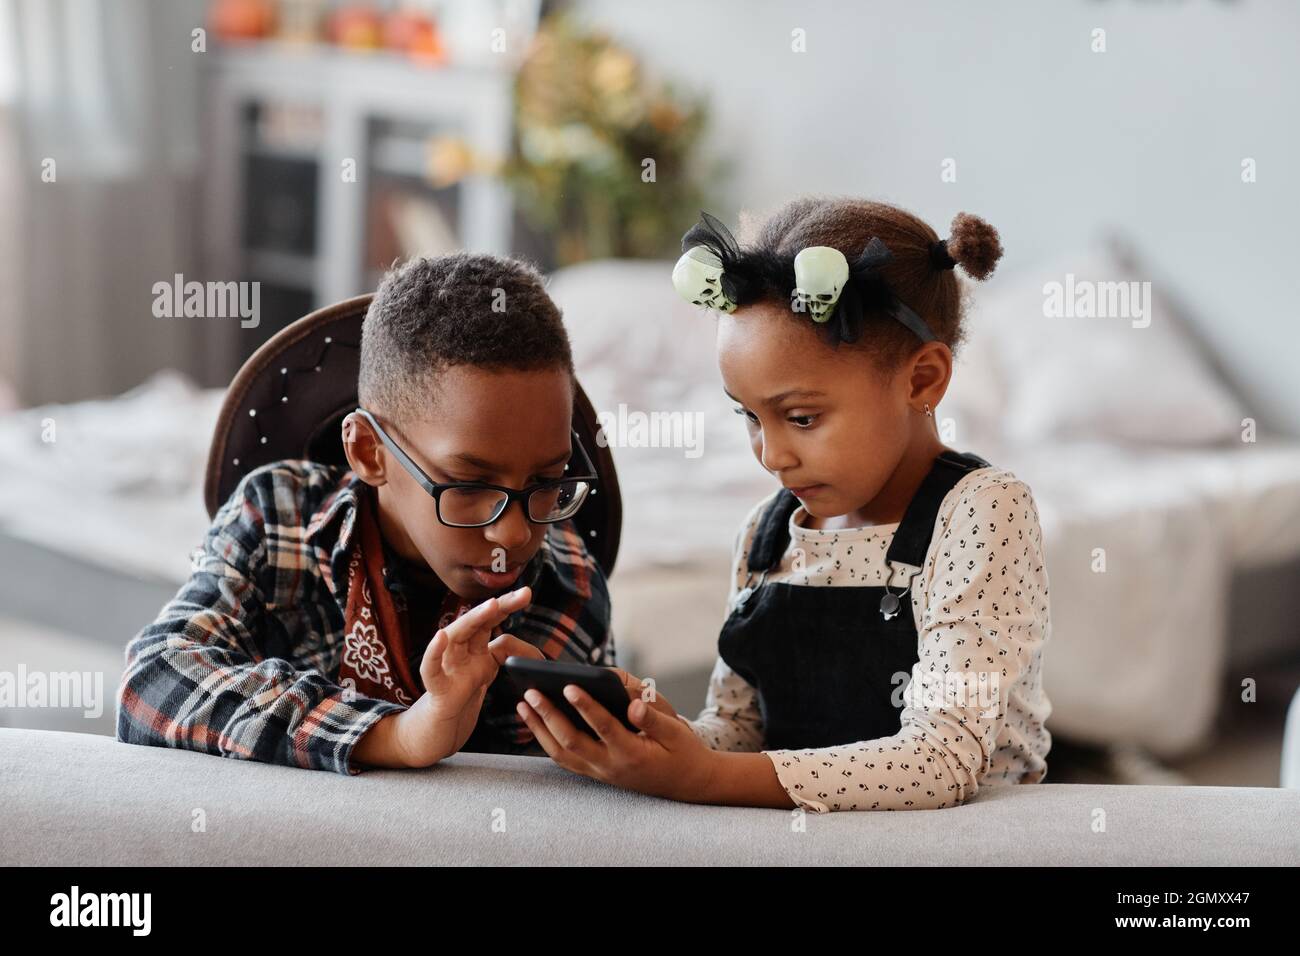 Front view portrait of two African-American kids using smartphone together in cozy home interior, copy space Stock Photo